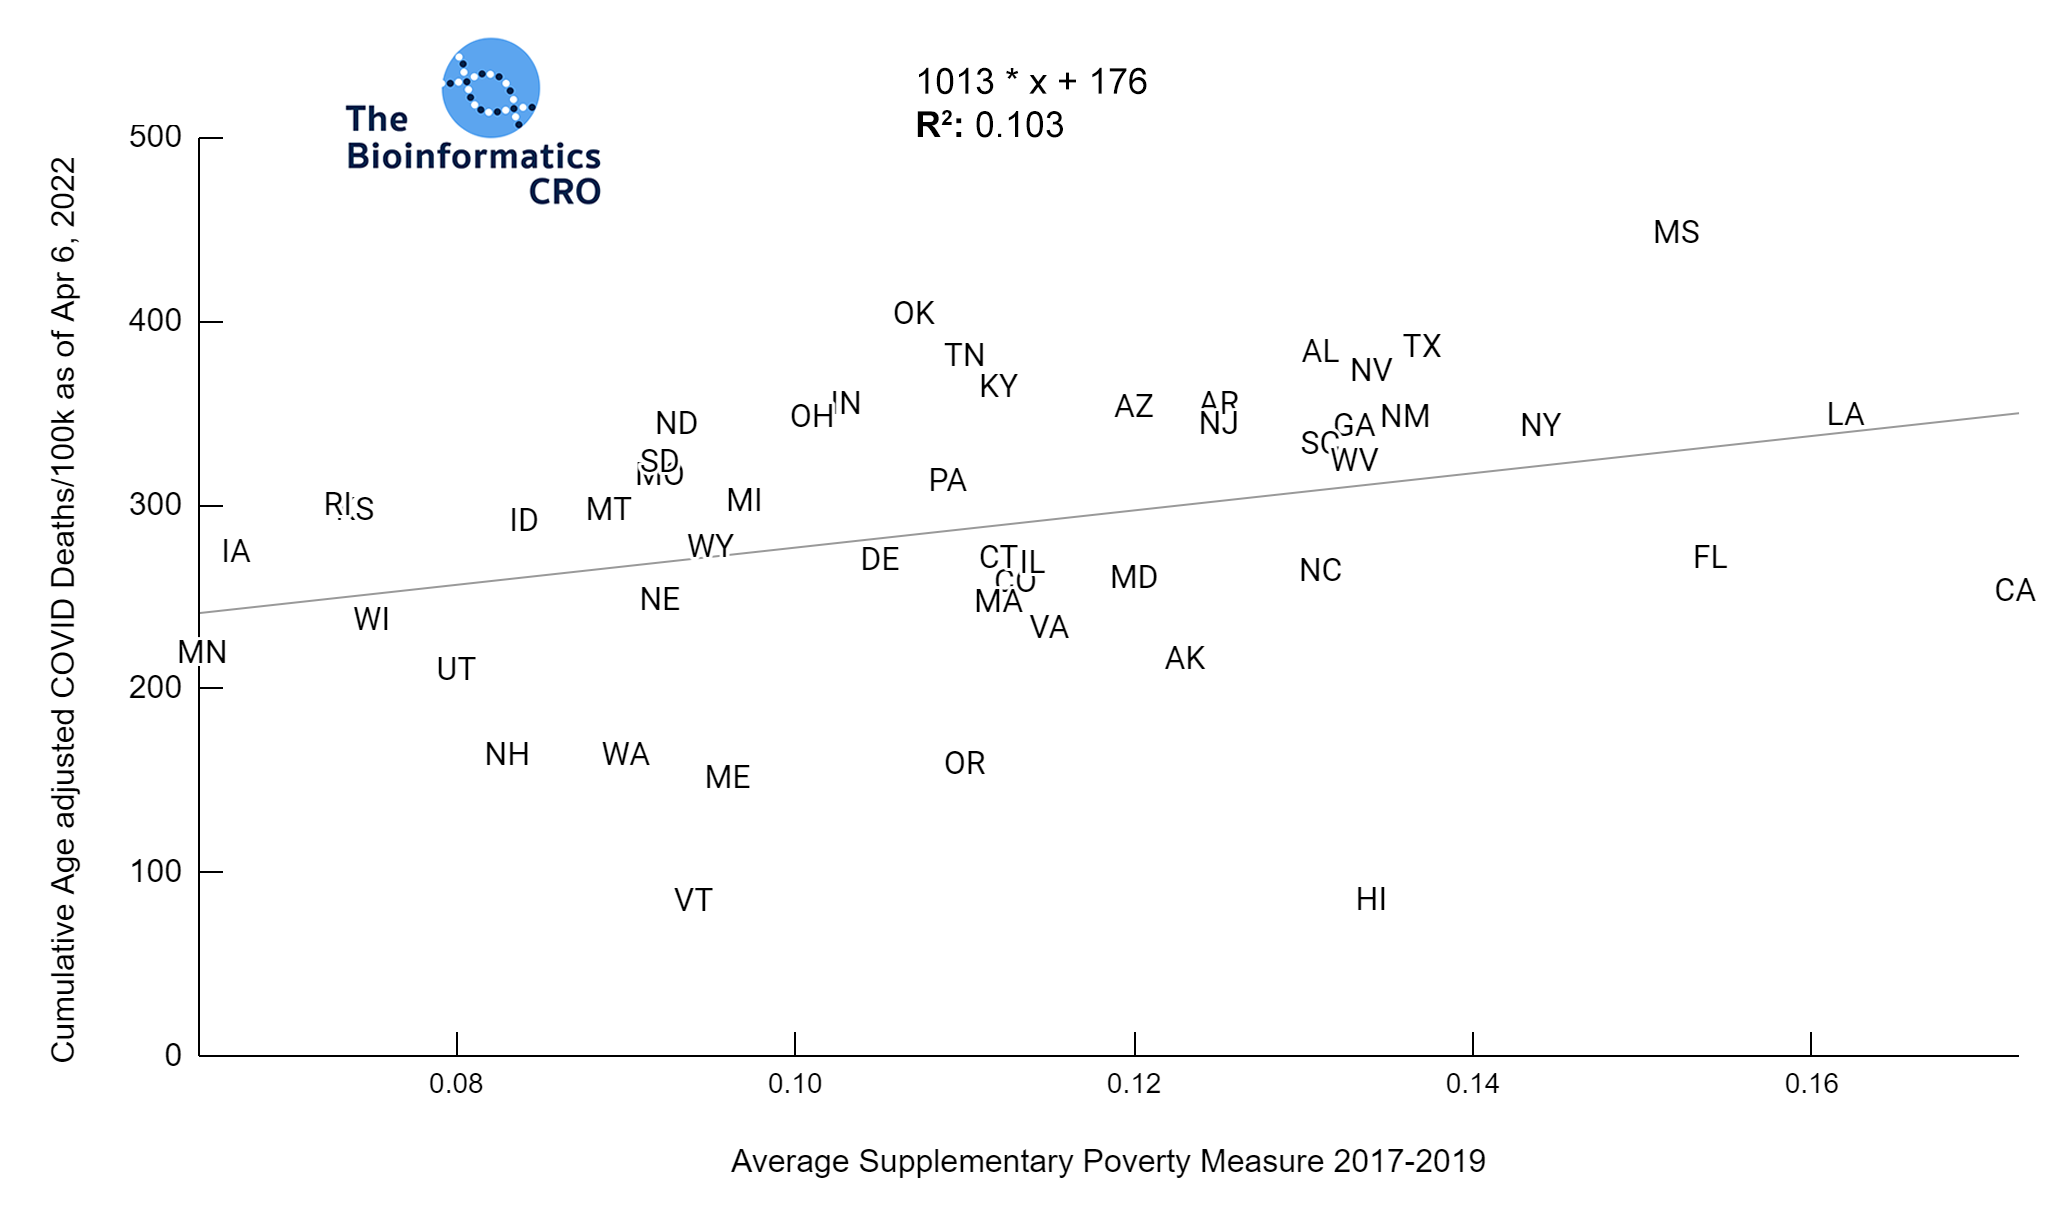 Supplementary Poverty Measure vs Age-Adjusted Deaths | y=1013x+176 | R^2: 0.103